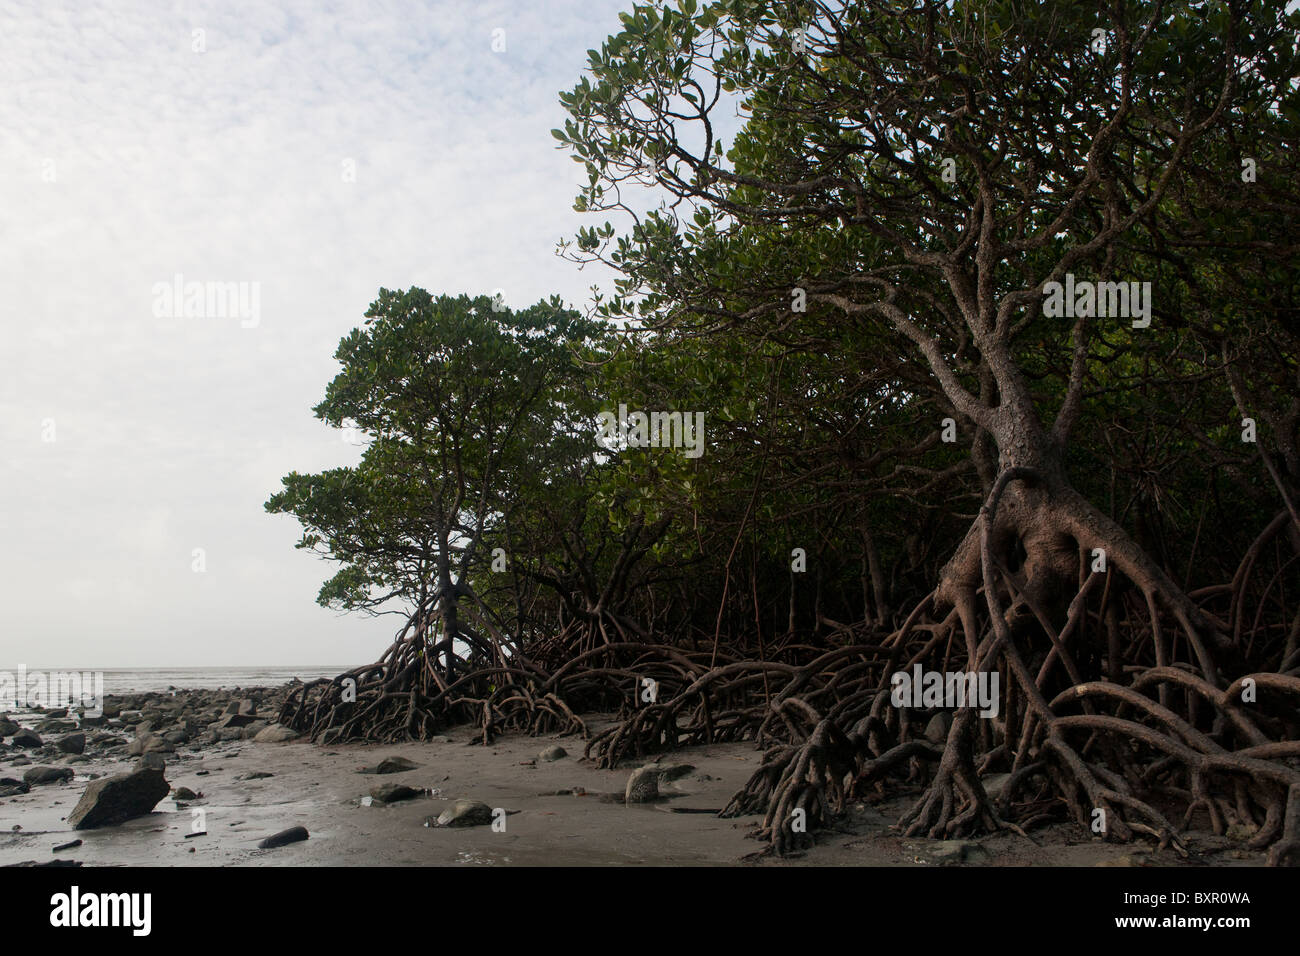 Edge of mangrove forest at low tide showing exposed aerial root structure and tidal plain. Stock Photo